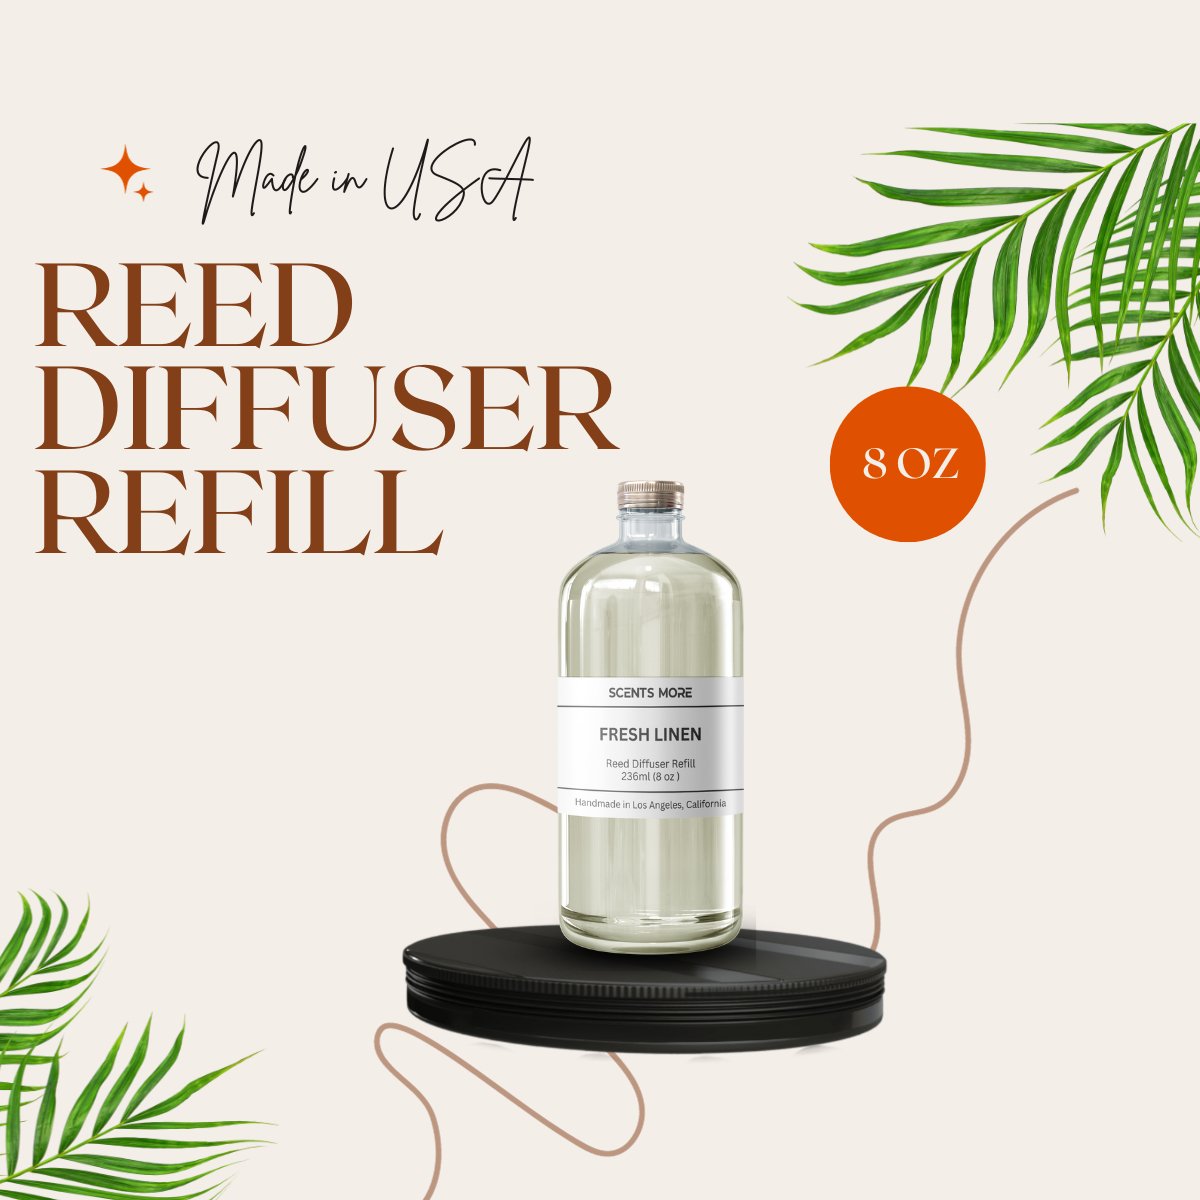 8oz Fresh Linen Reed Diffuser Refill - Scents More